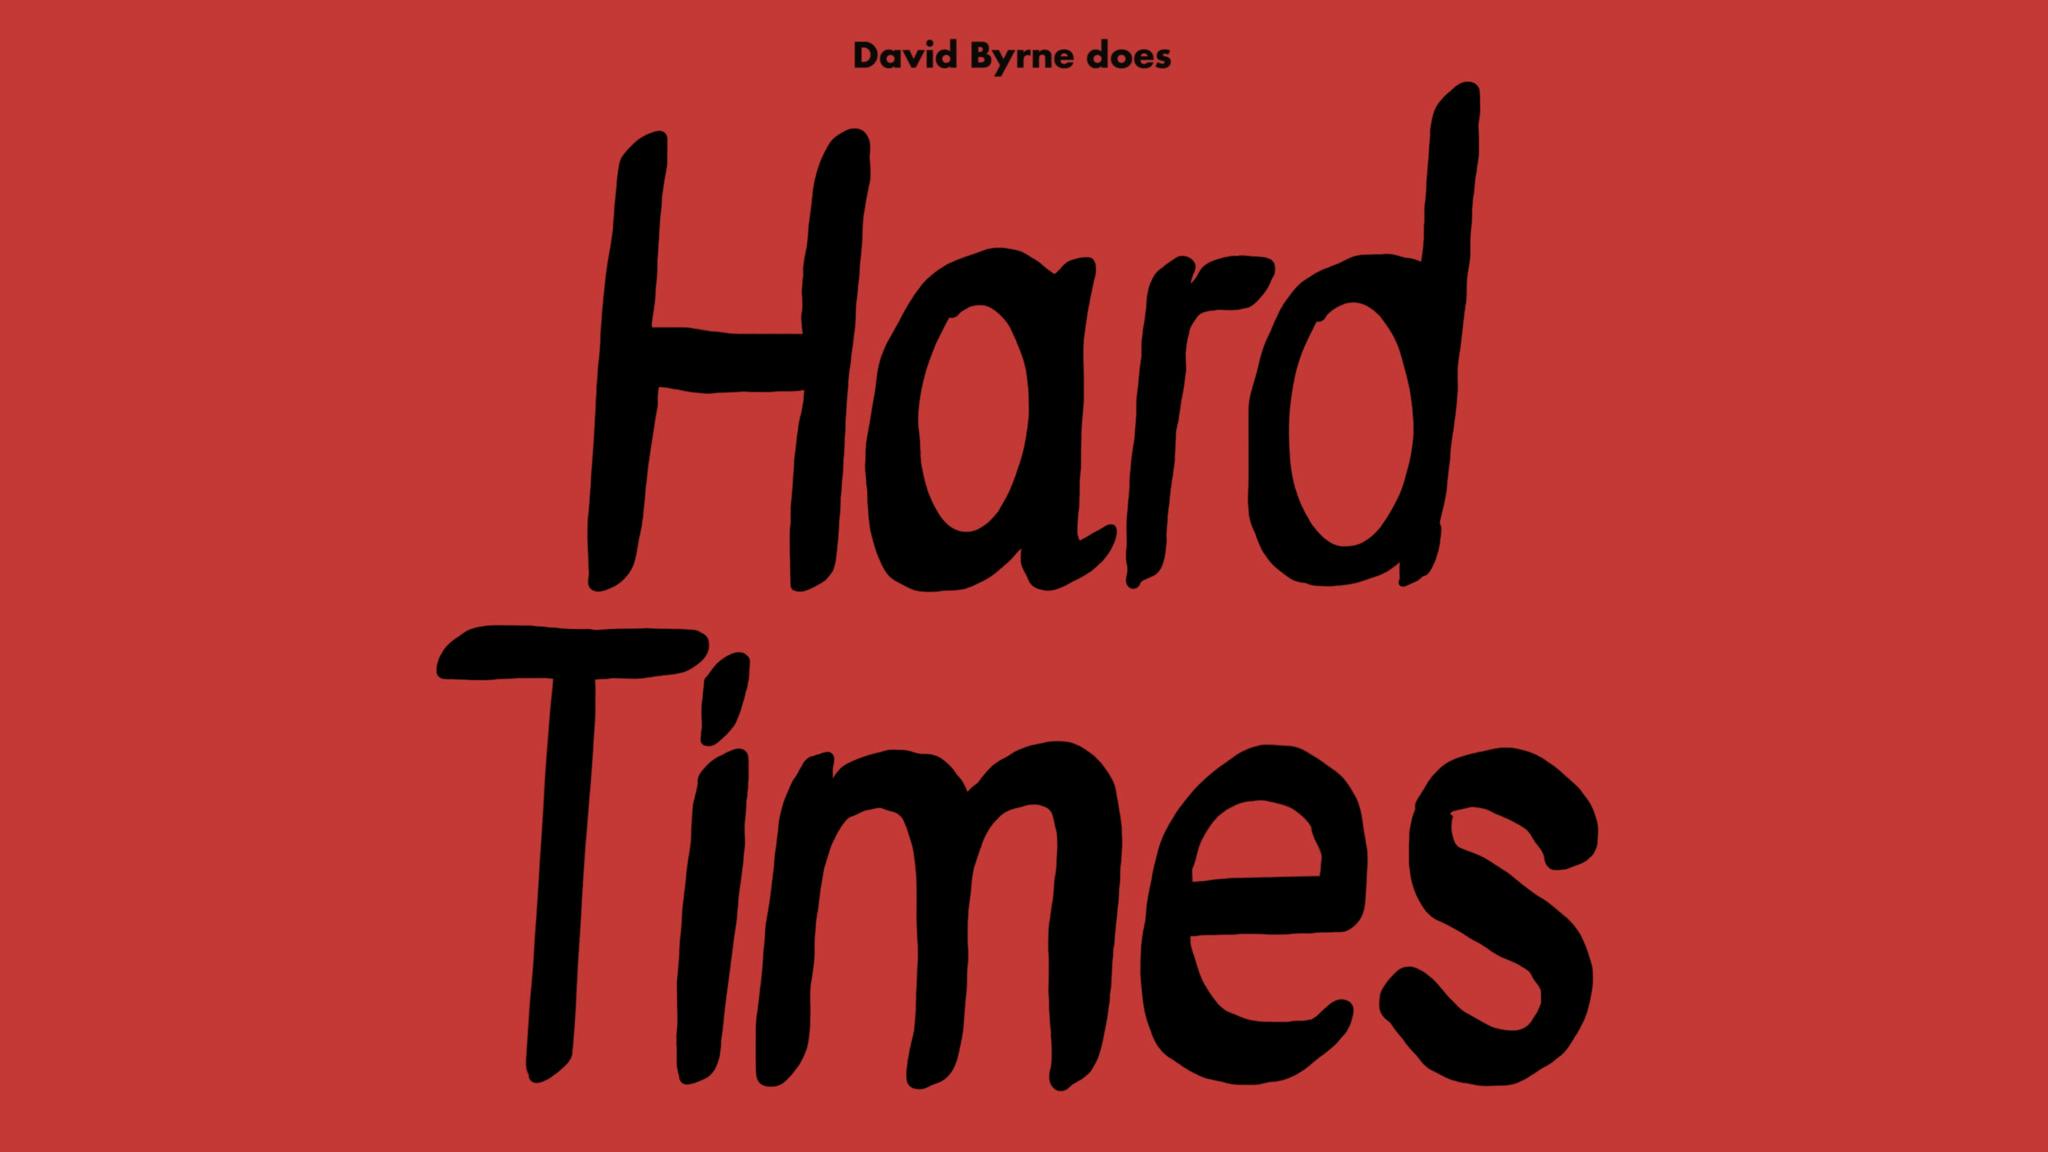 Listen to David Byrne’s cover of Hard Times by Paramore